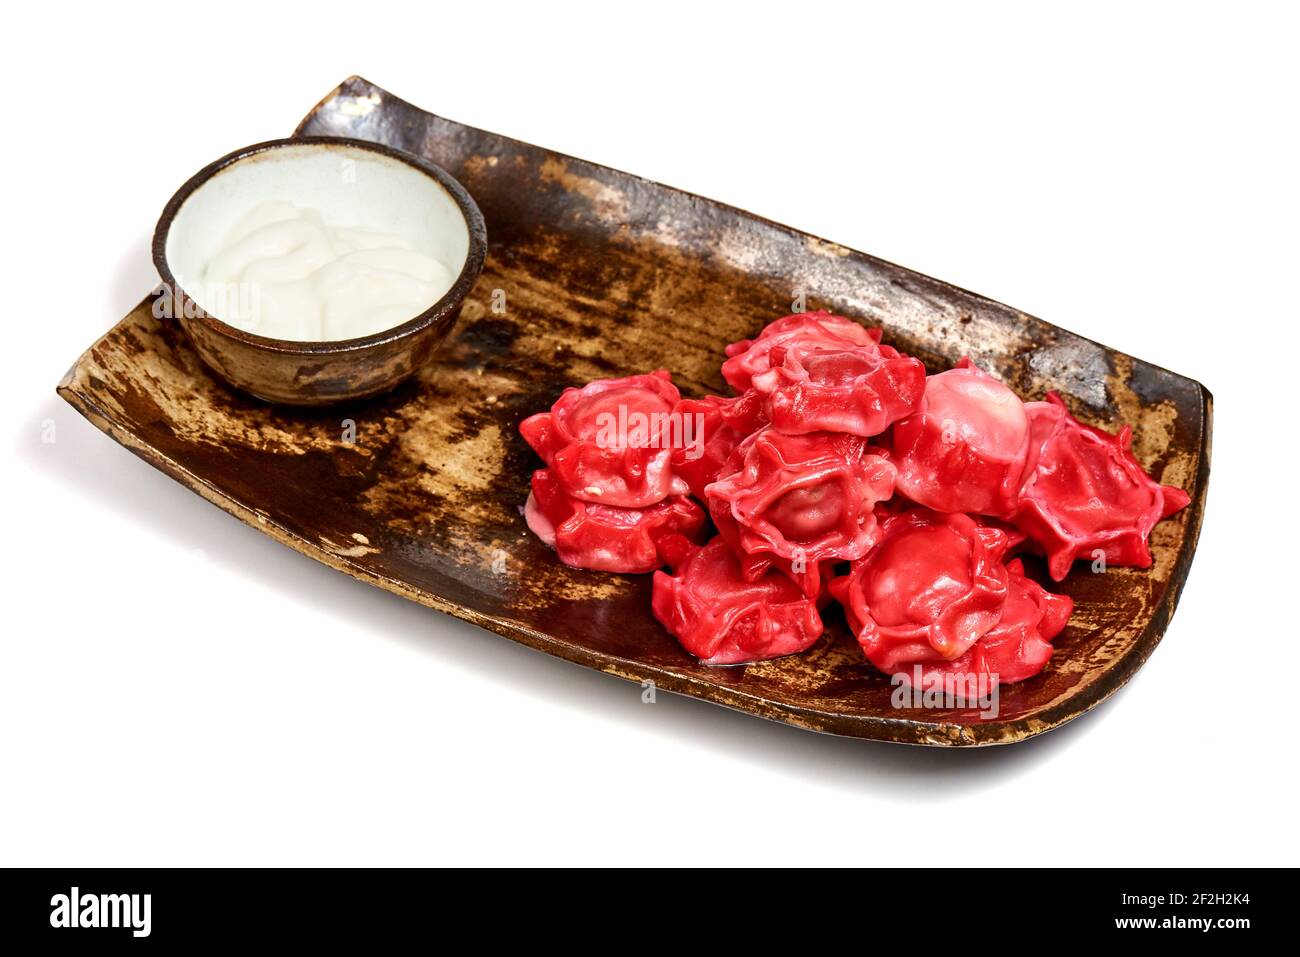 Red dim sum on a wooden plate on a white background. Stock Photo